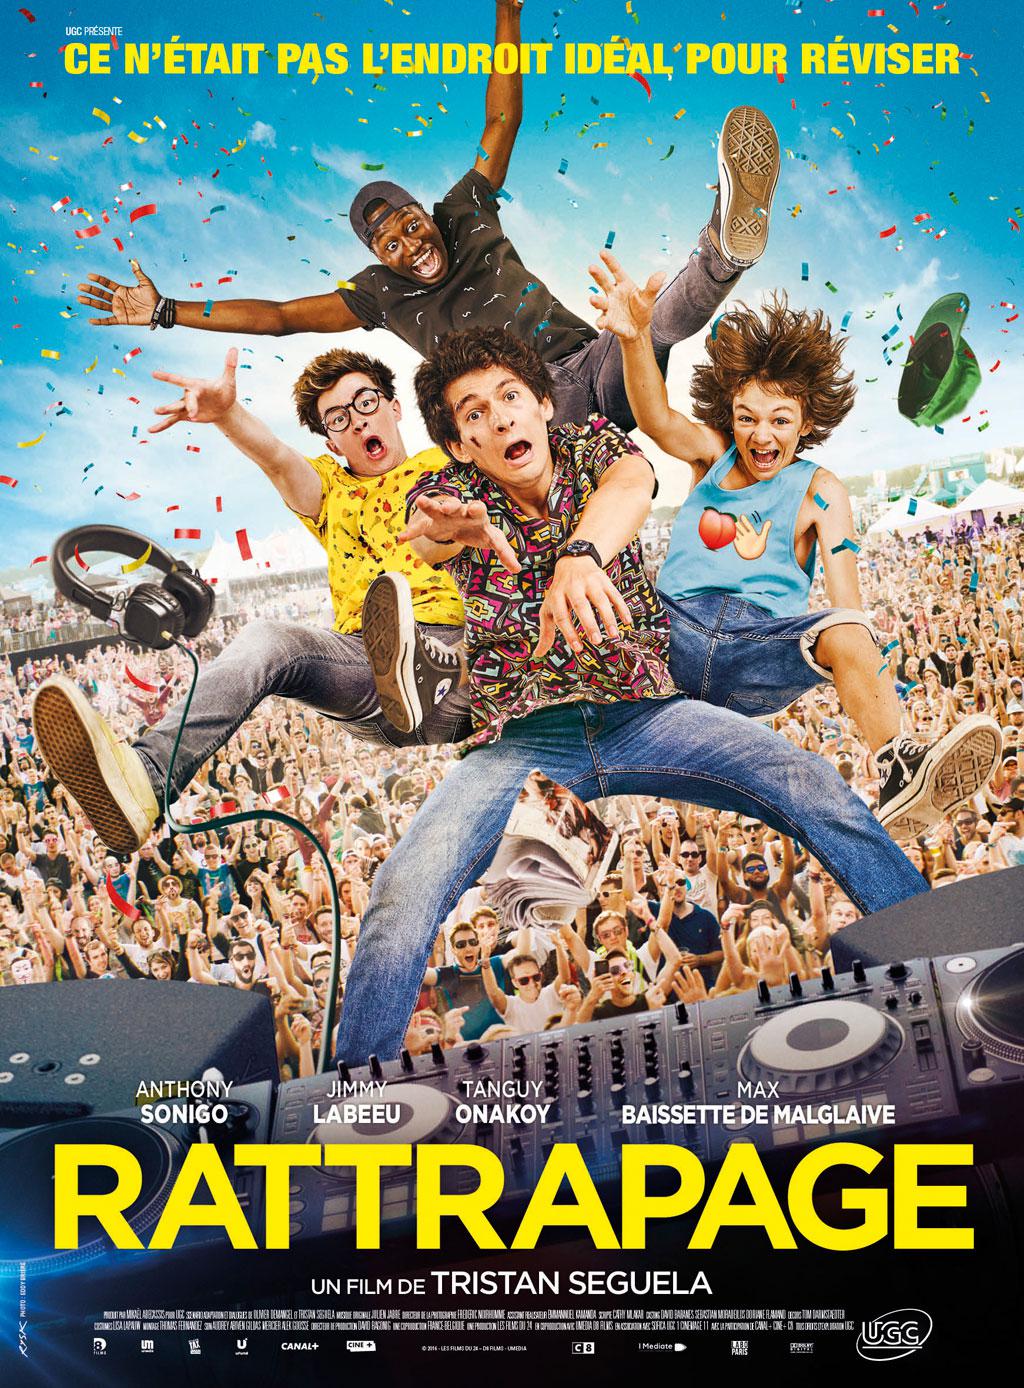 Rattrapage (2017) Main Poster